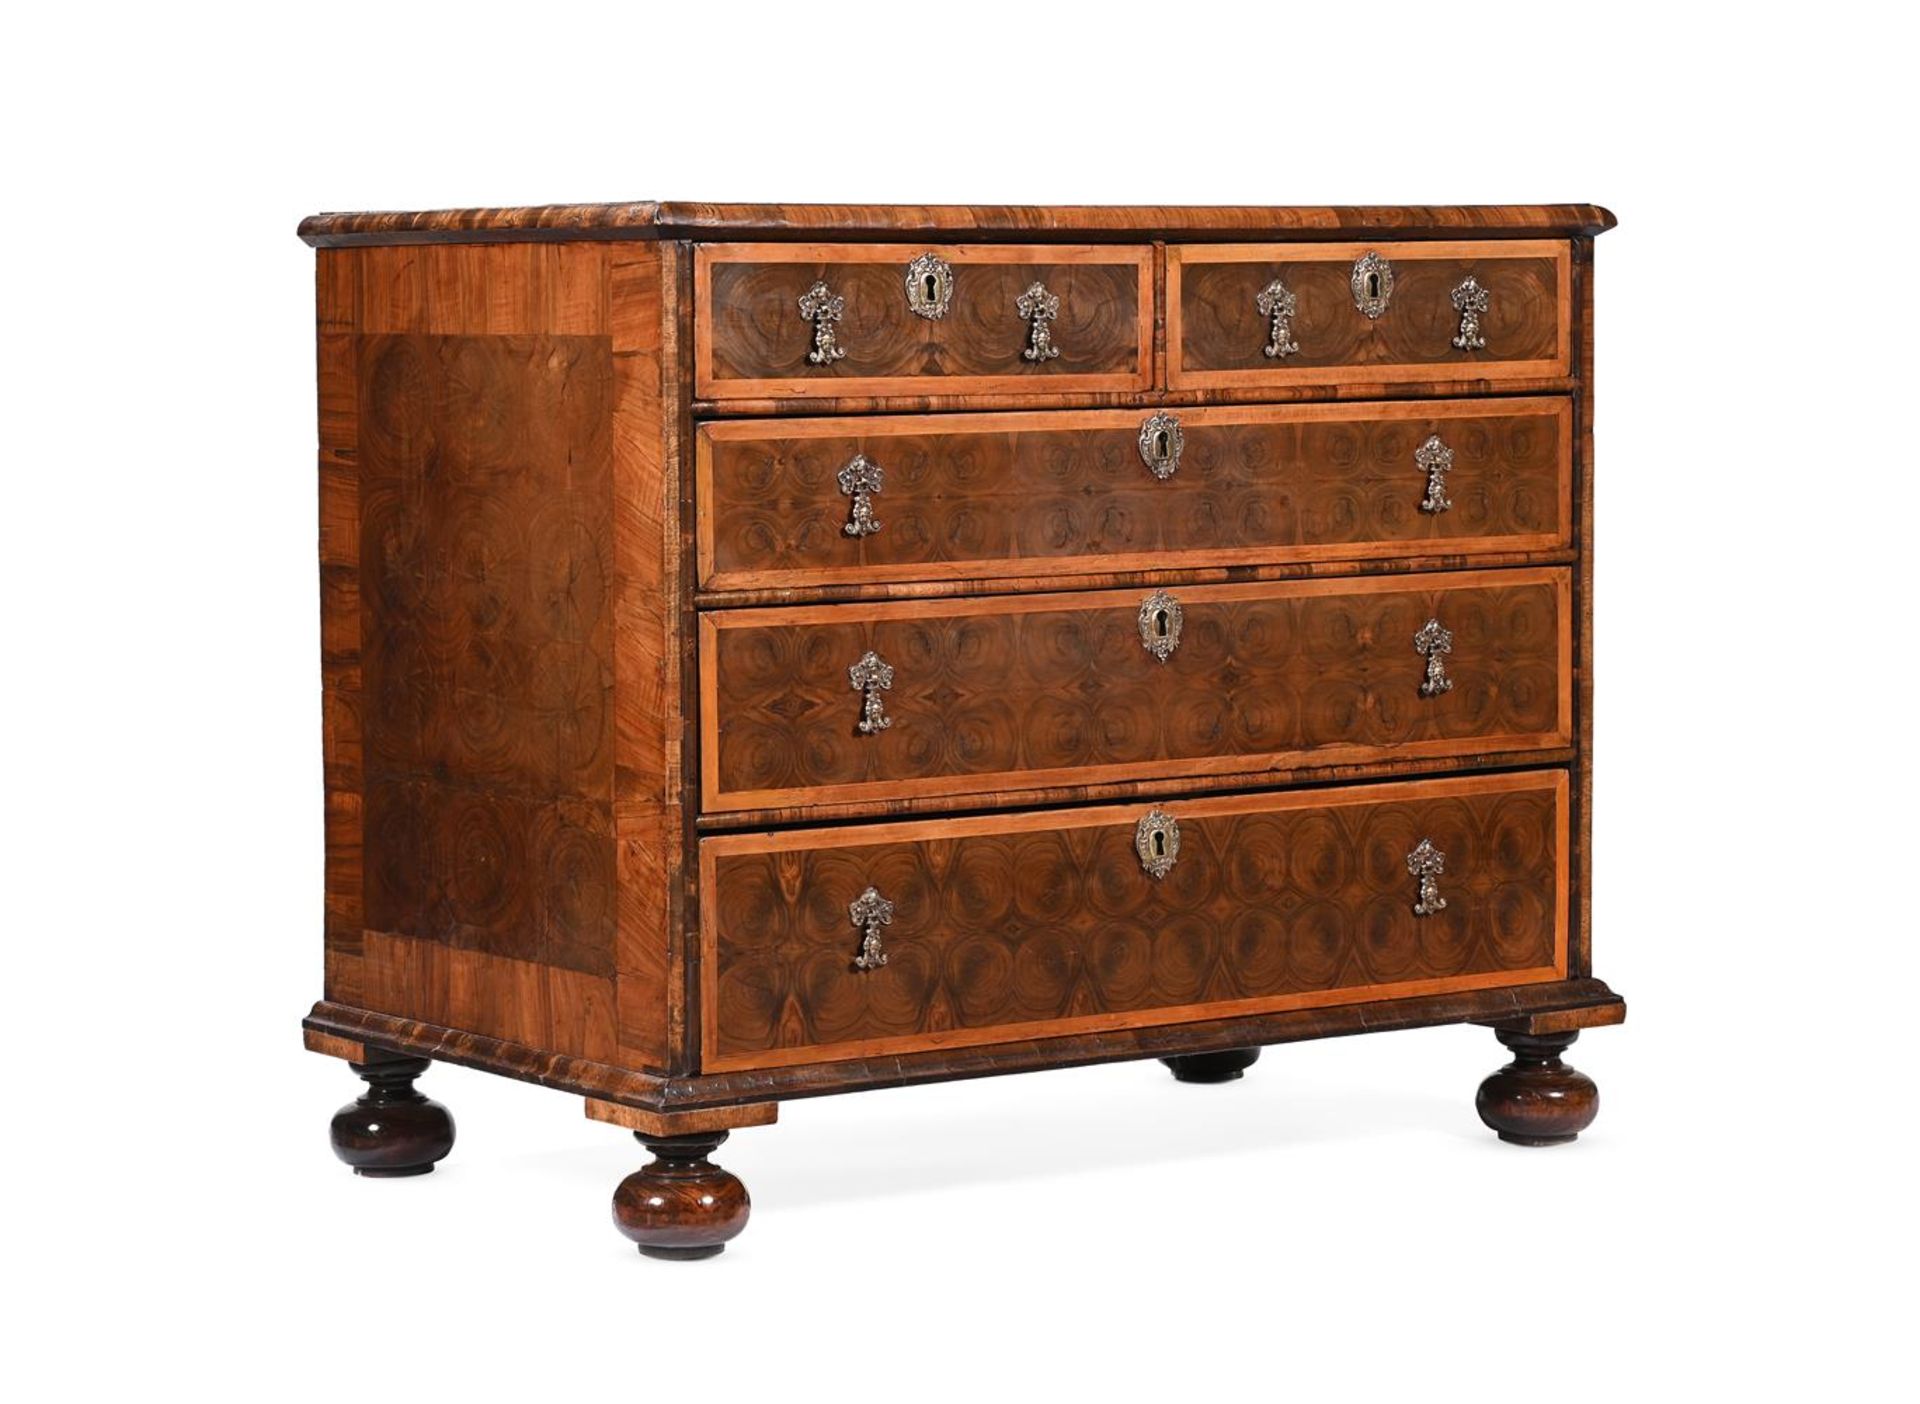 A WILLIAM & MARY OLIVEWOOD, WALNUT AND FRUITWOOD OYSTER VENEERED CHEST OF DRAWERS, CIRCA 1690 - Image 4 of 4